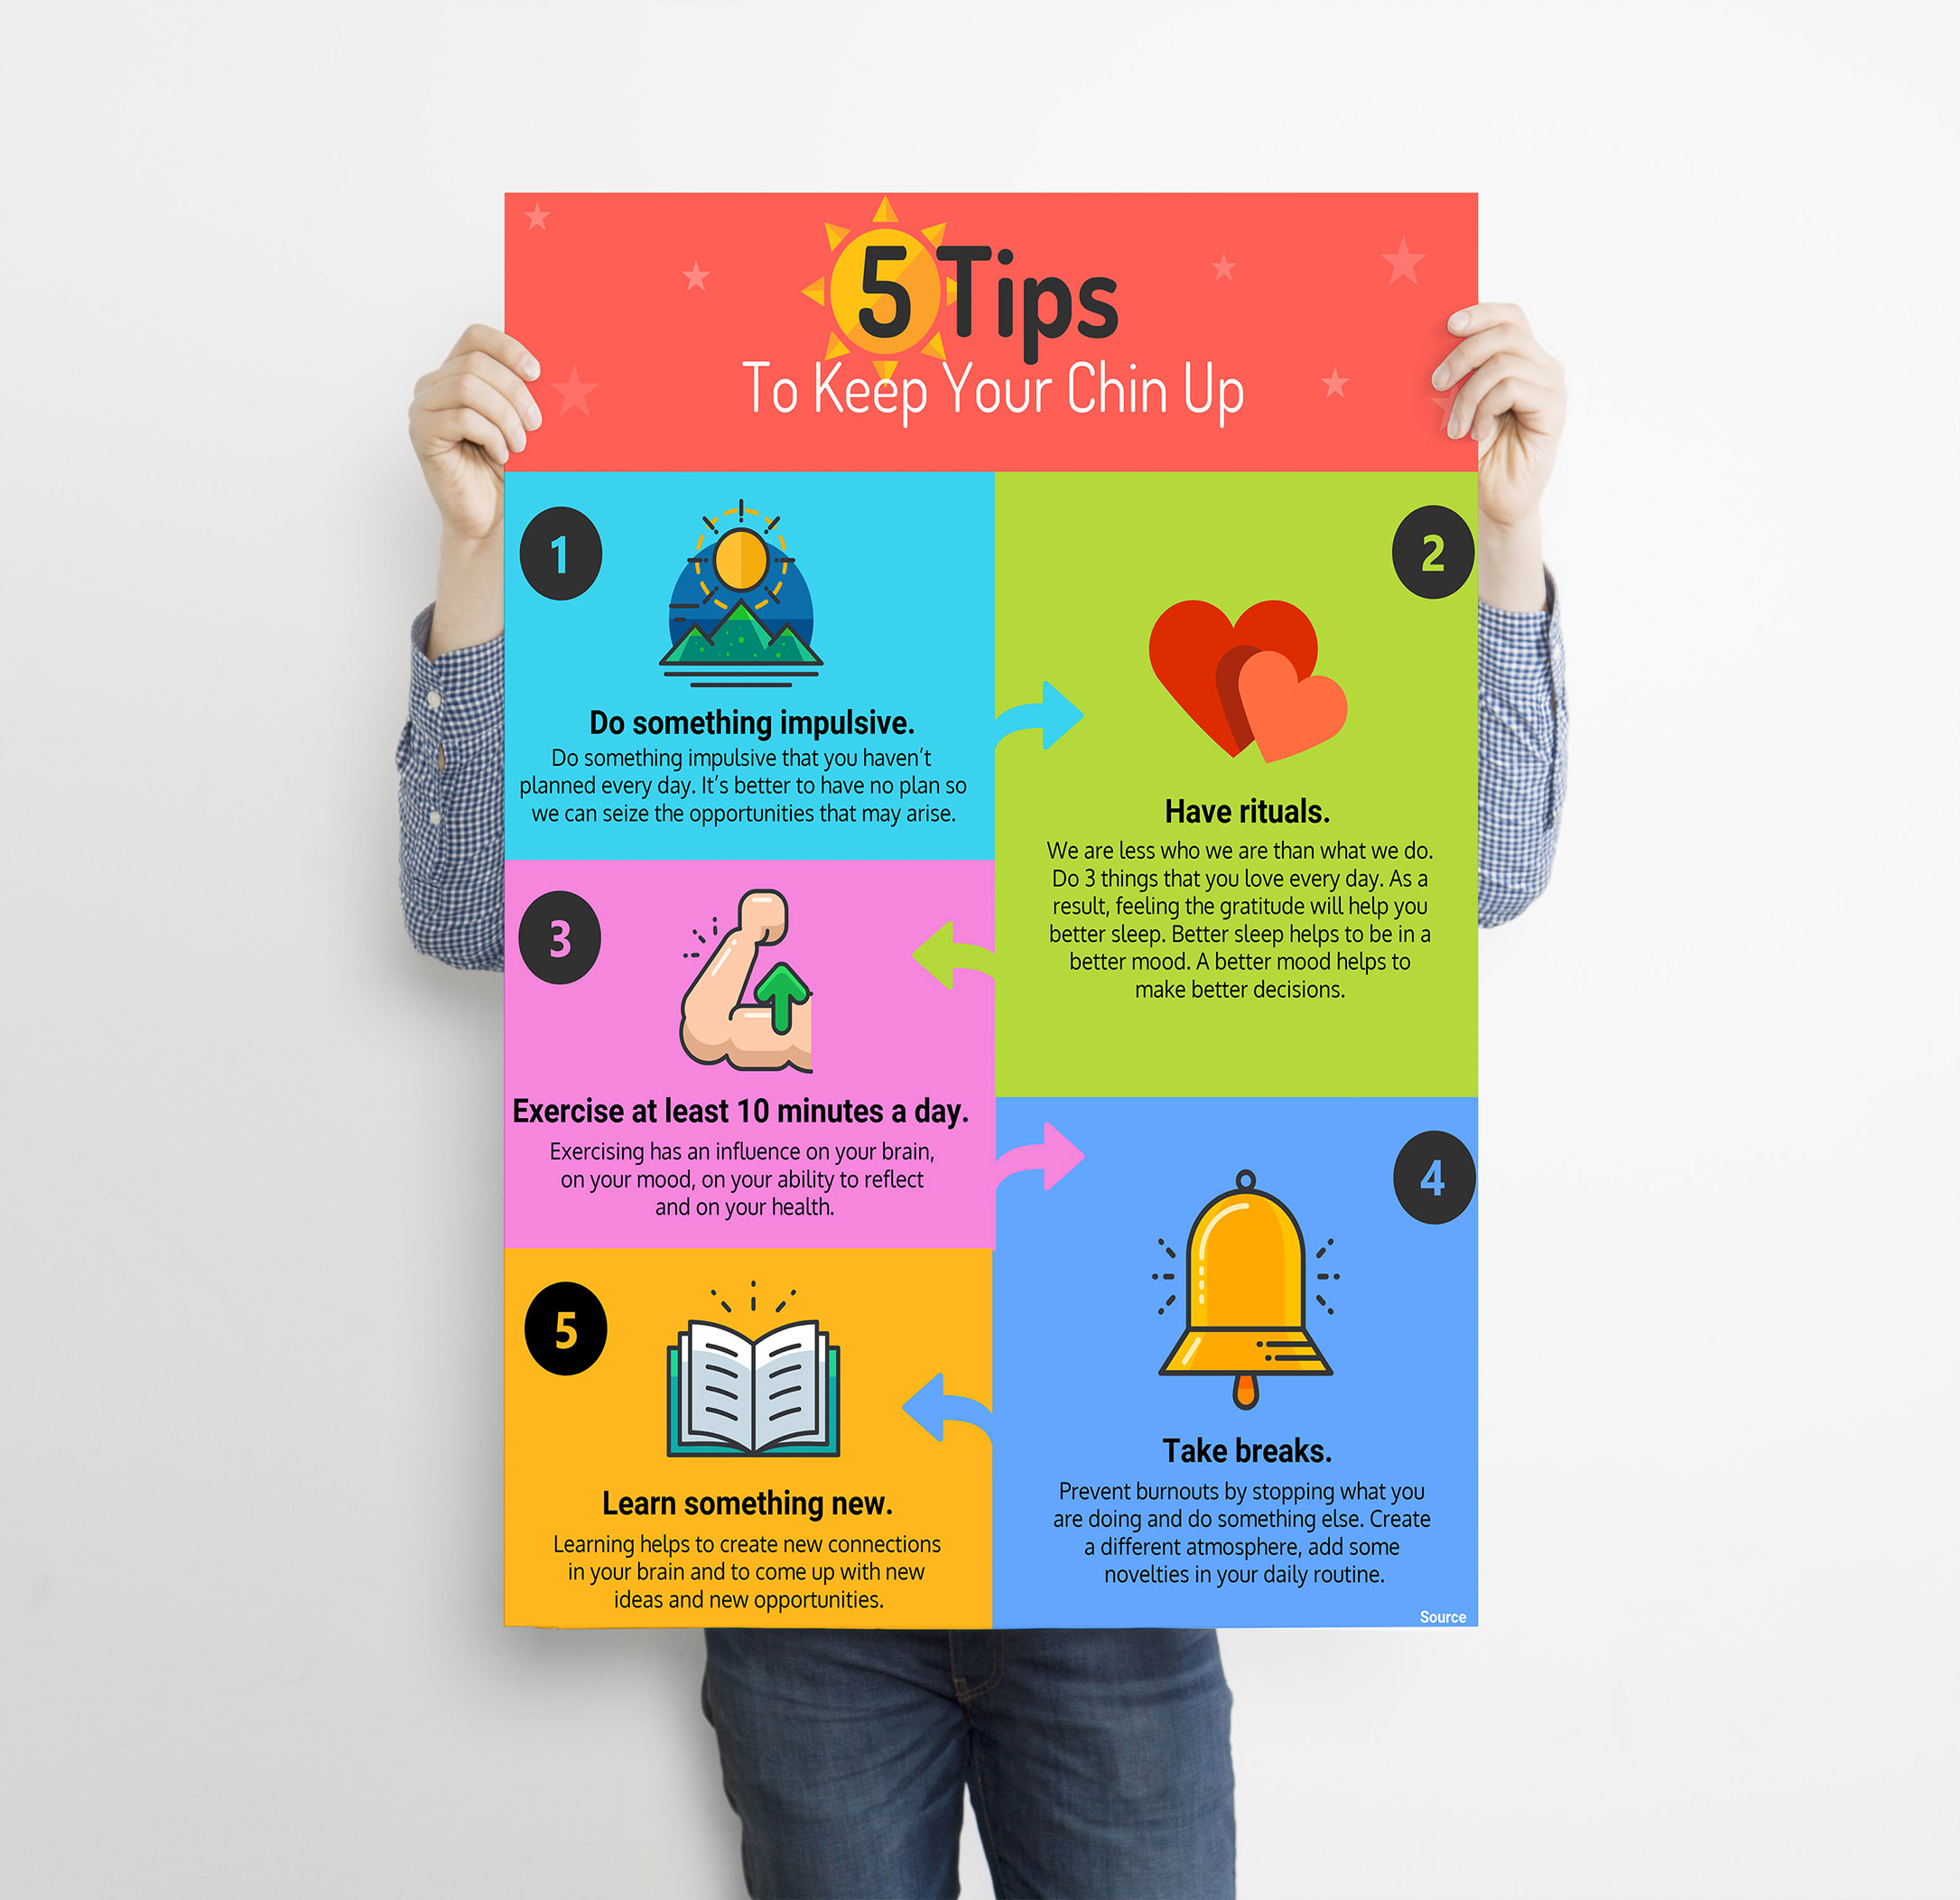 How to make a good information design poster - Quora